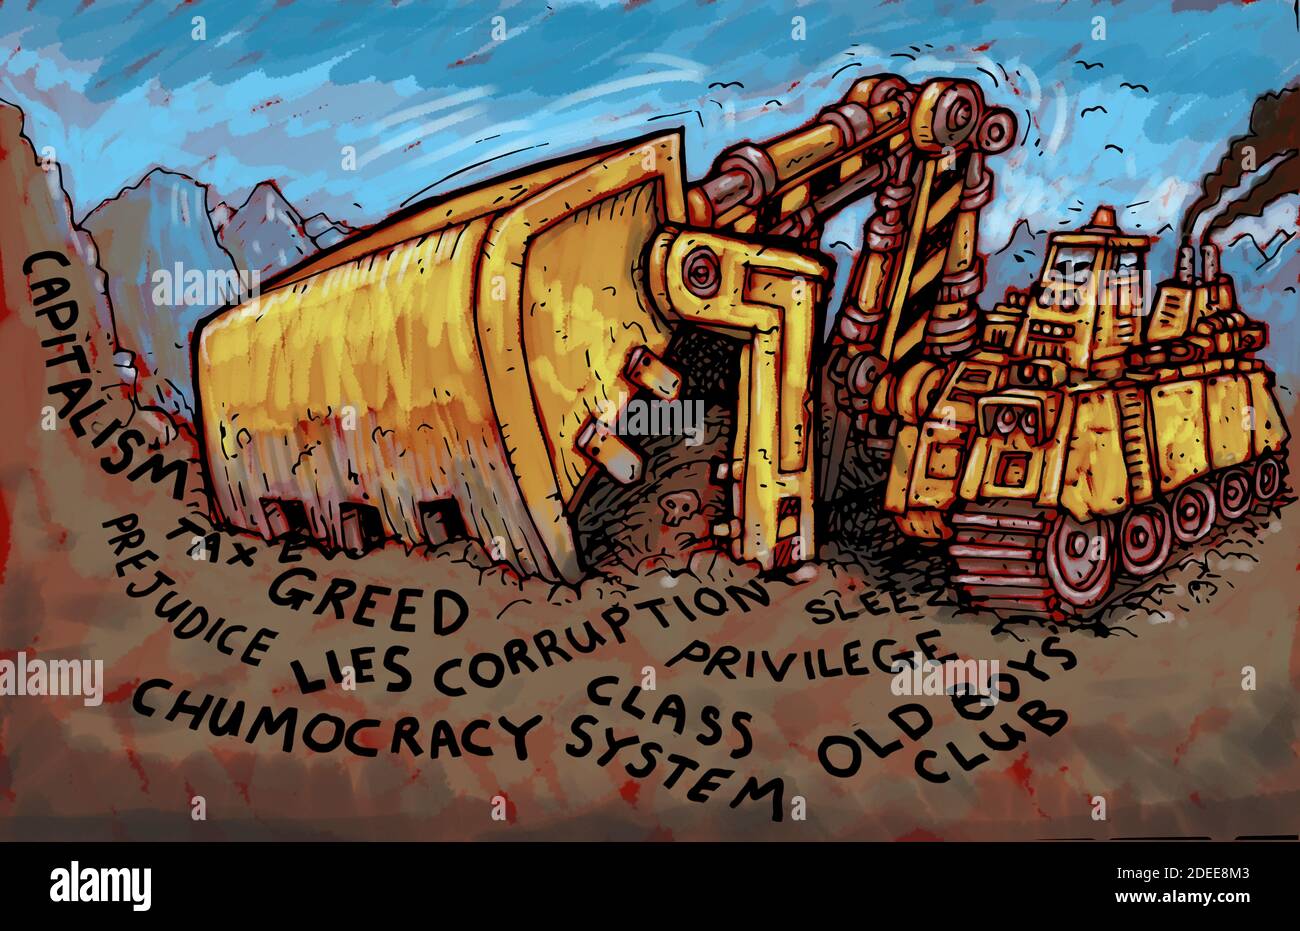 Concept art illustration showing the destructive power of corruption class, chumocracy, greed, privilege, old boy's club, lies, capitalism, tax greed Stock Photo